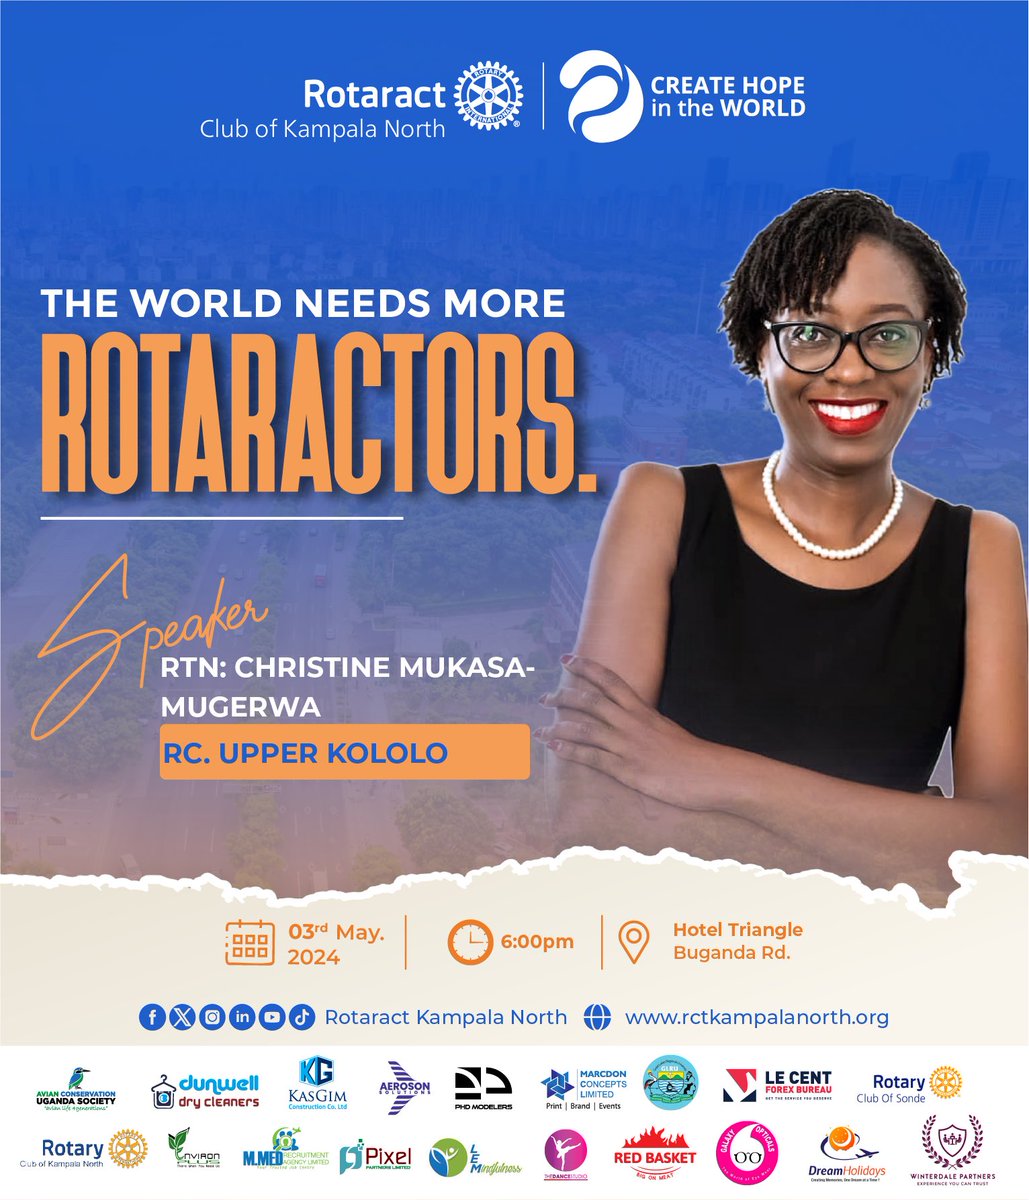 Join us today at Hotel Triangle, Buganda Rd for our fellowship as RTN Christine Mukasa-Mugerwa from @RCUpperKololo inspires us on why the world needs more Rotaractors! Buddy Group in charge: Jemba #KANOsMeetUp